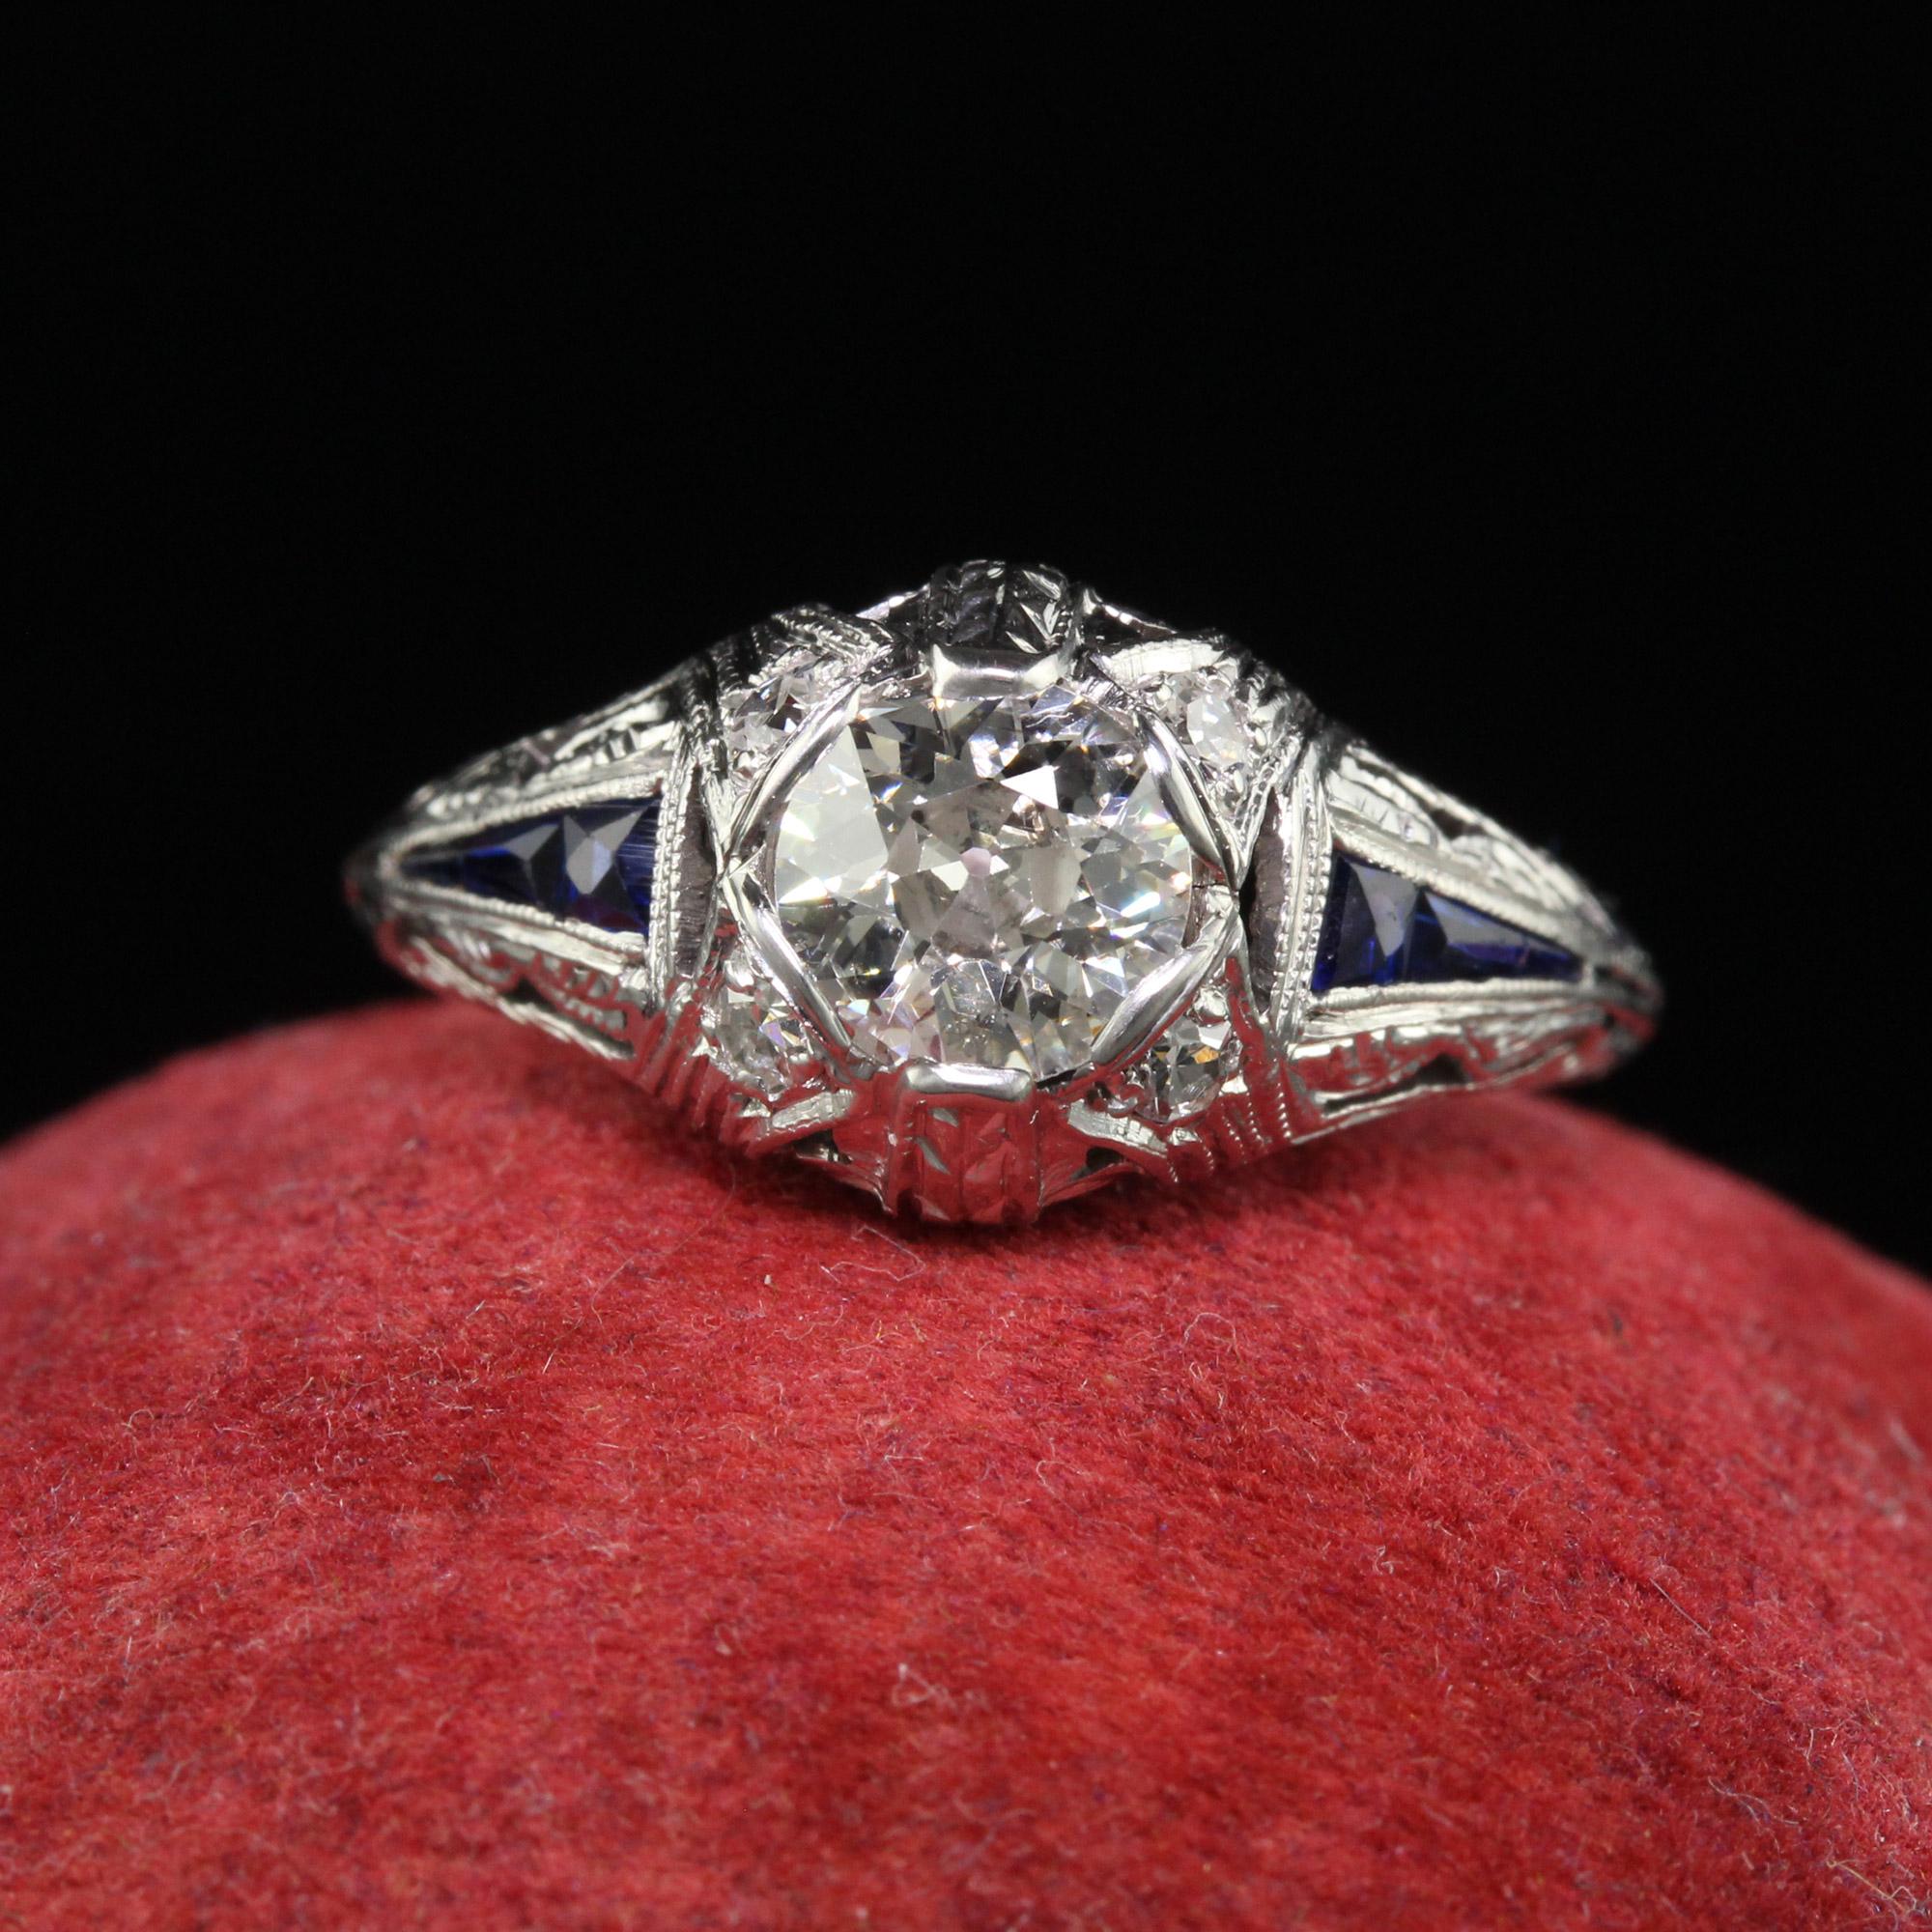 Beautiful Antique Art Deco Platinum Old Euro Diamond Sapphire Engagement Ring. This gorgeous art deco engagement ring is crafted in platinum. The center holds a beautiful old European cut diamond and is set in a gorgeous art deco mounting that has